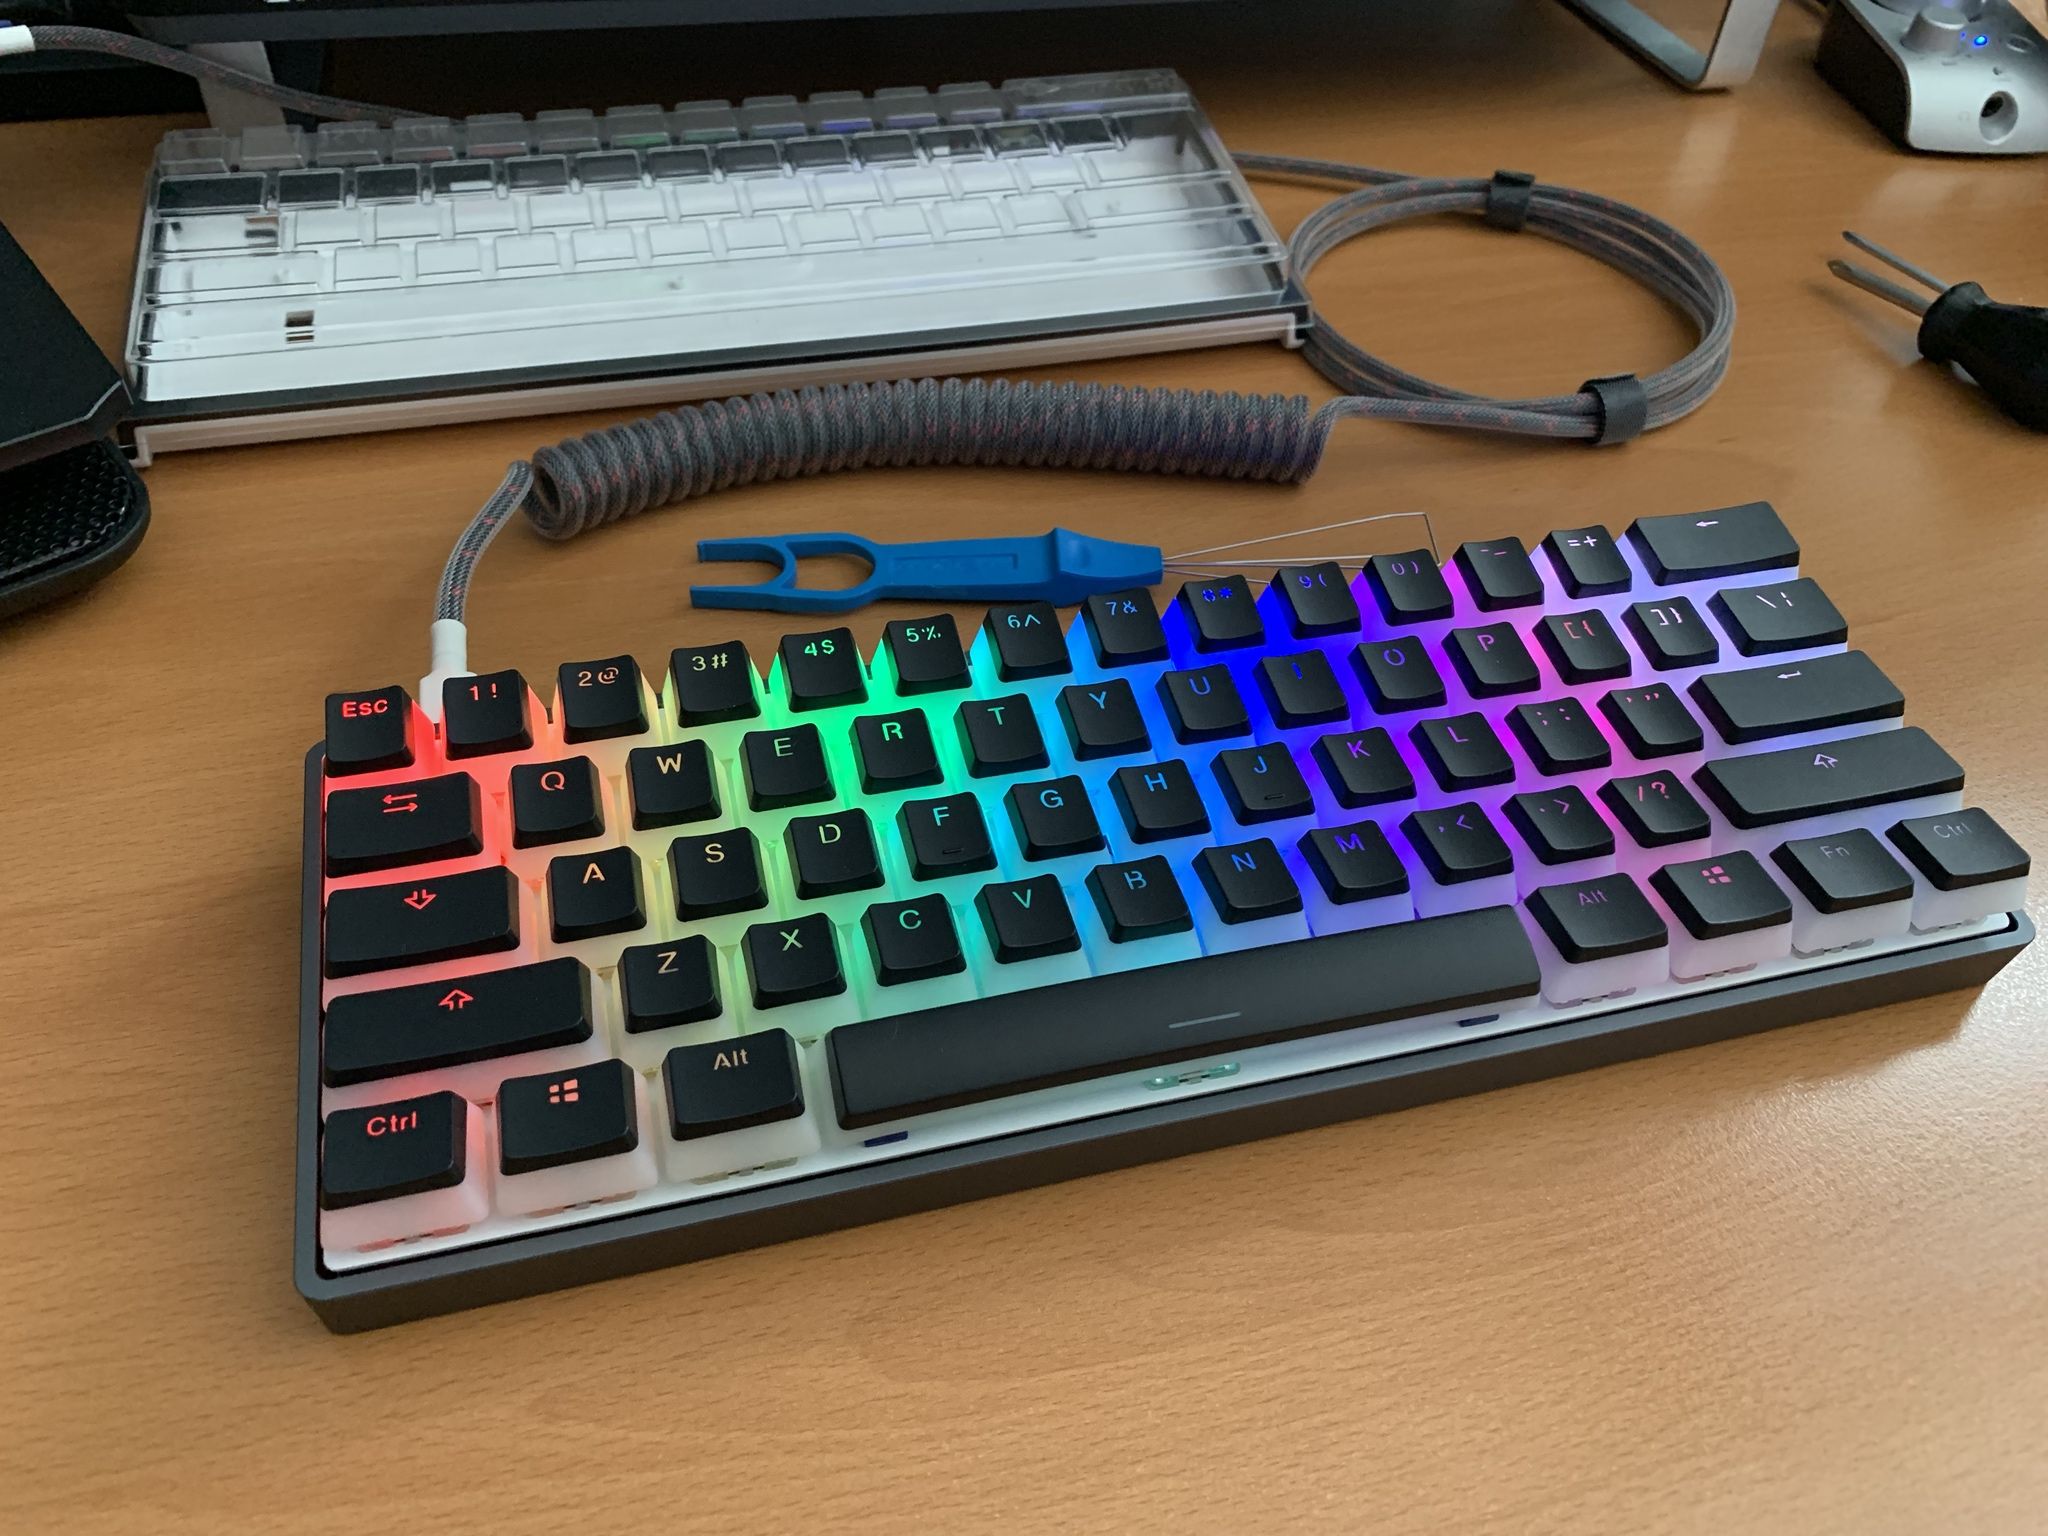 Ducky One 2 RGB Mini w/ pudding keycaps, 60% low profile aluminum case from KBDfans, and custom USB cable from Mechcables